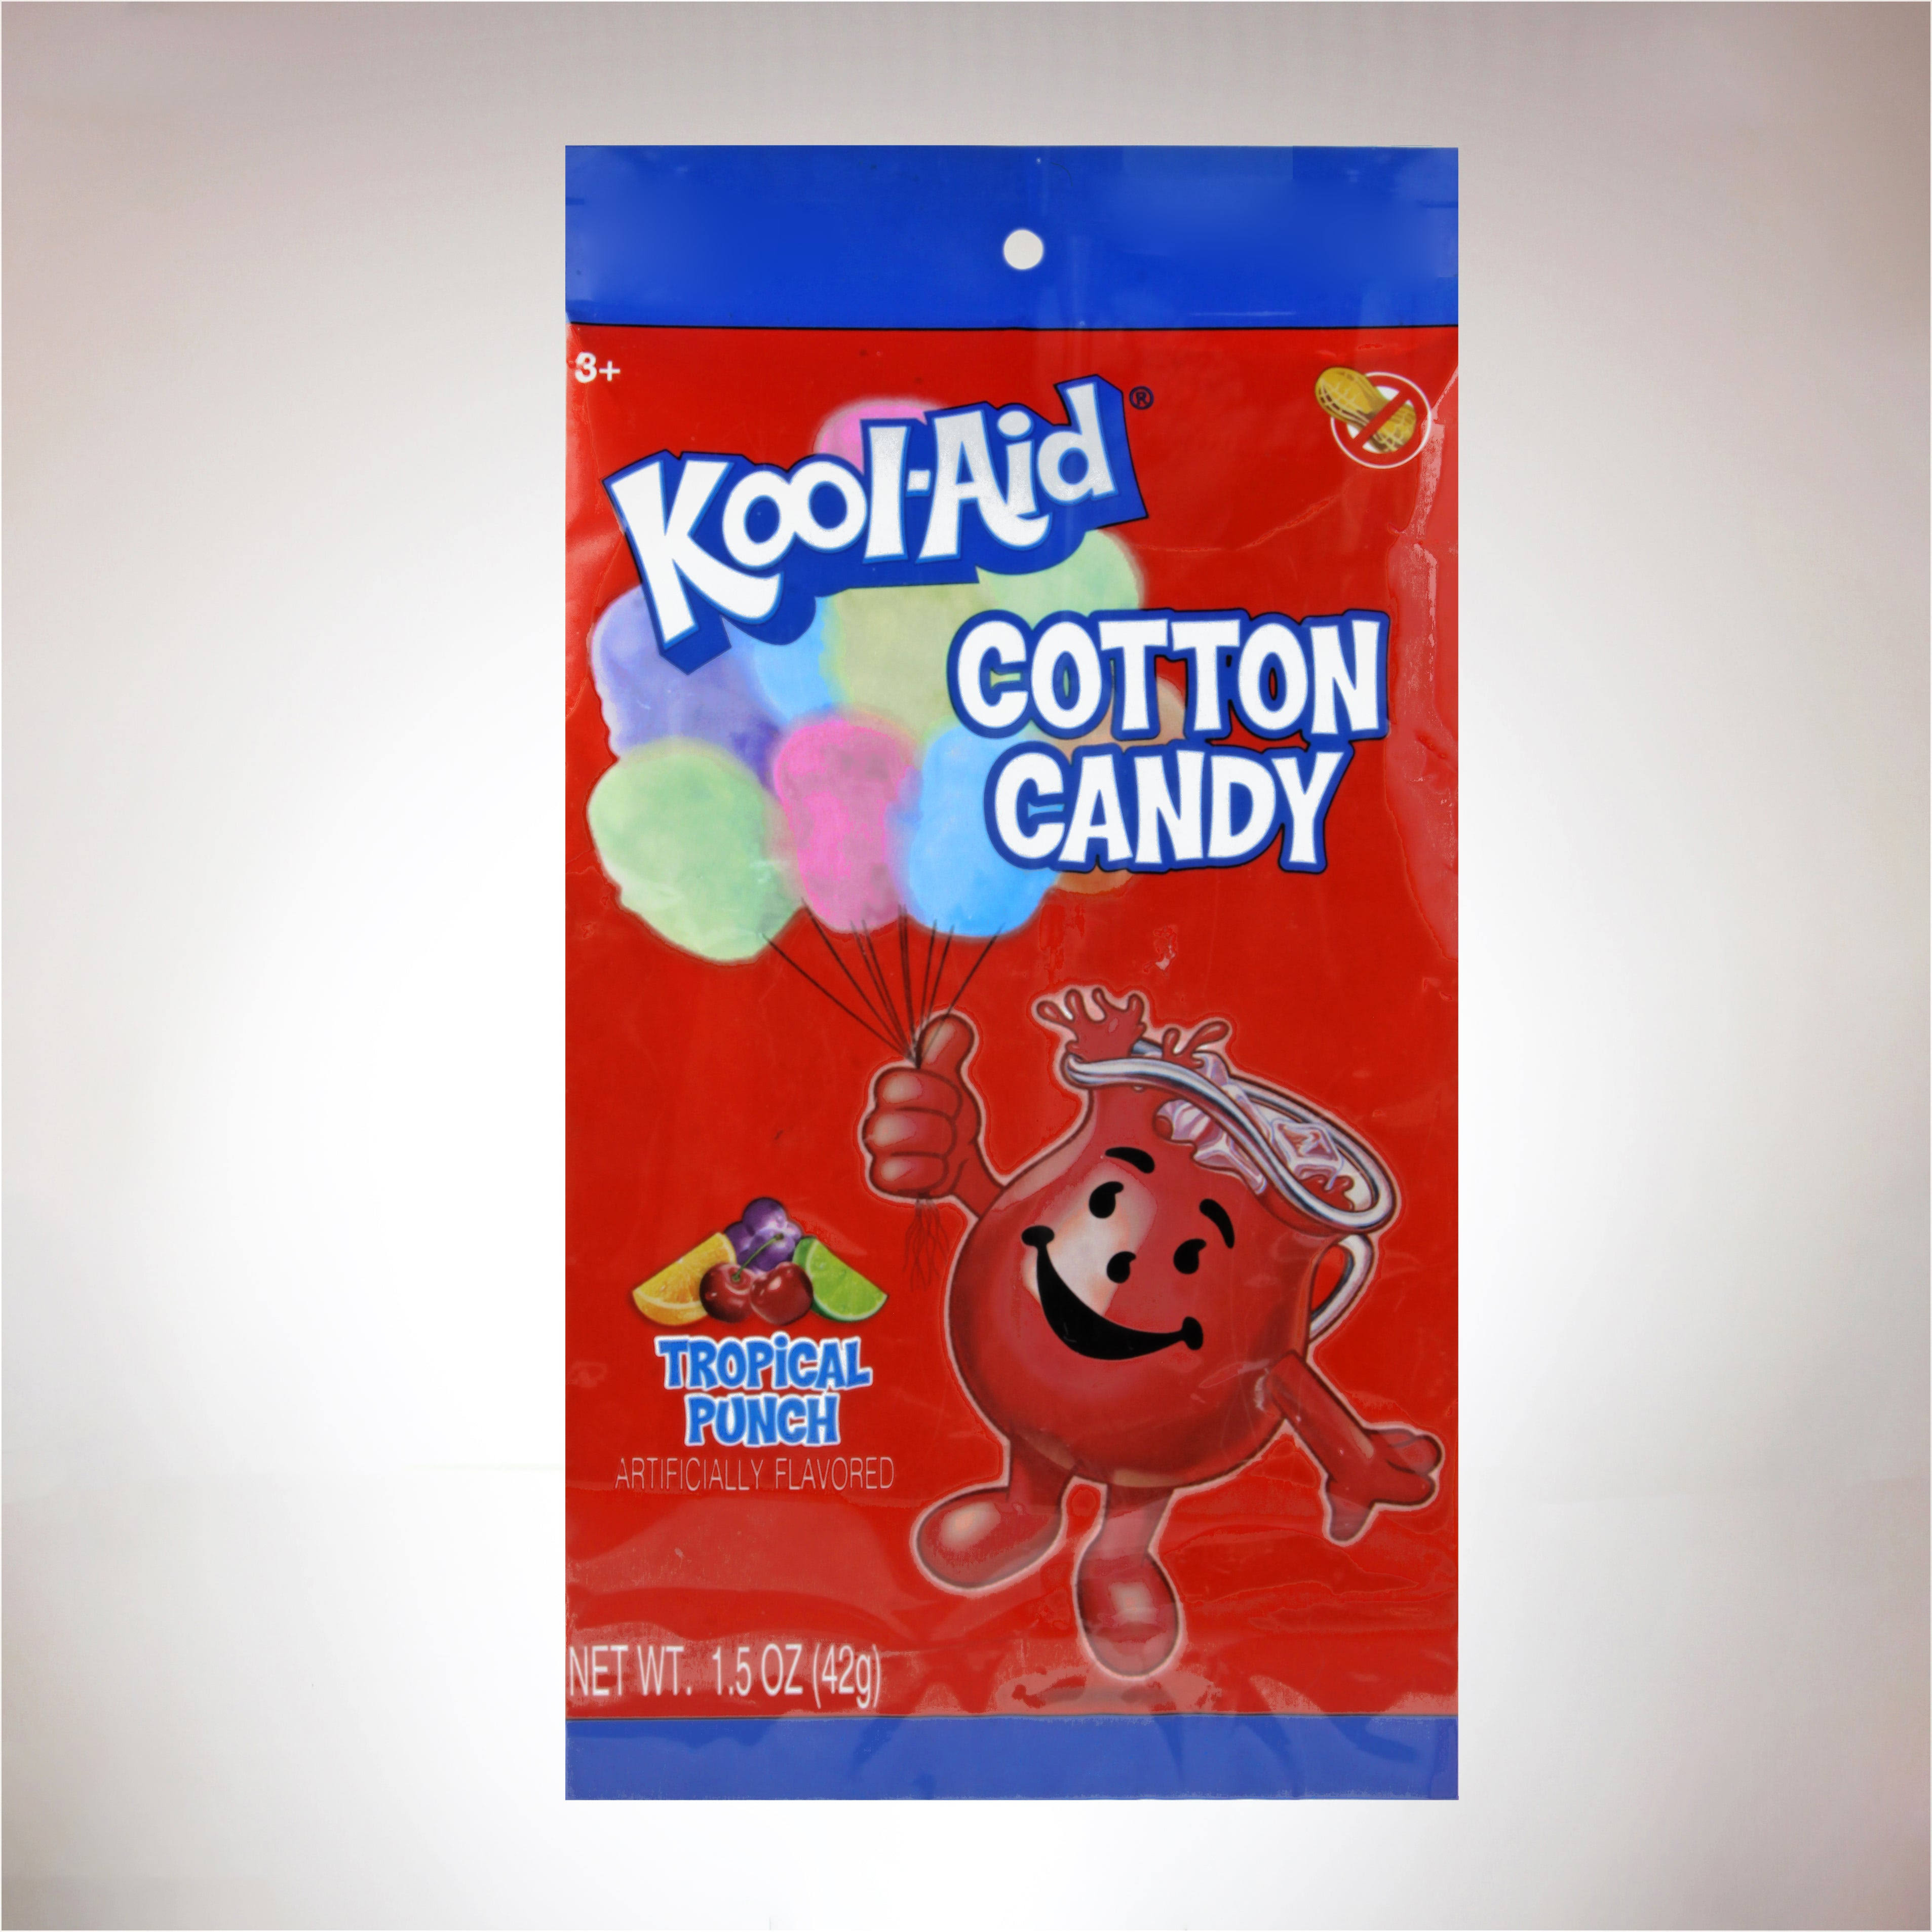 Kool-Aid Tropical Punch Cotton Candy